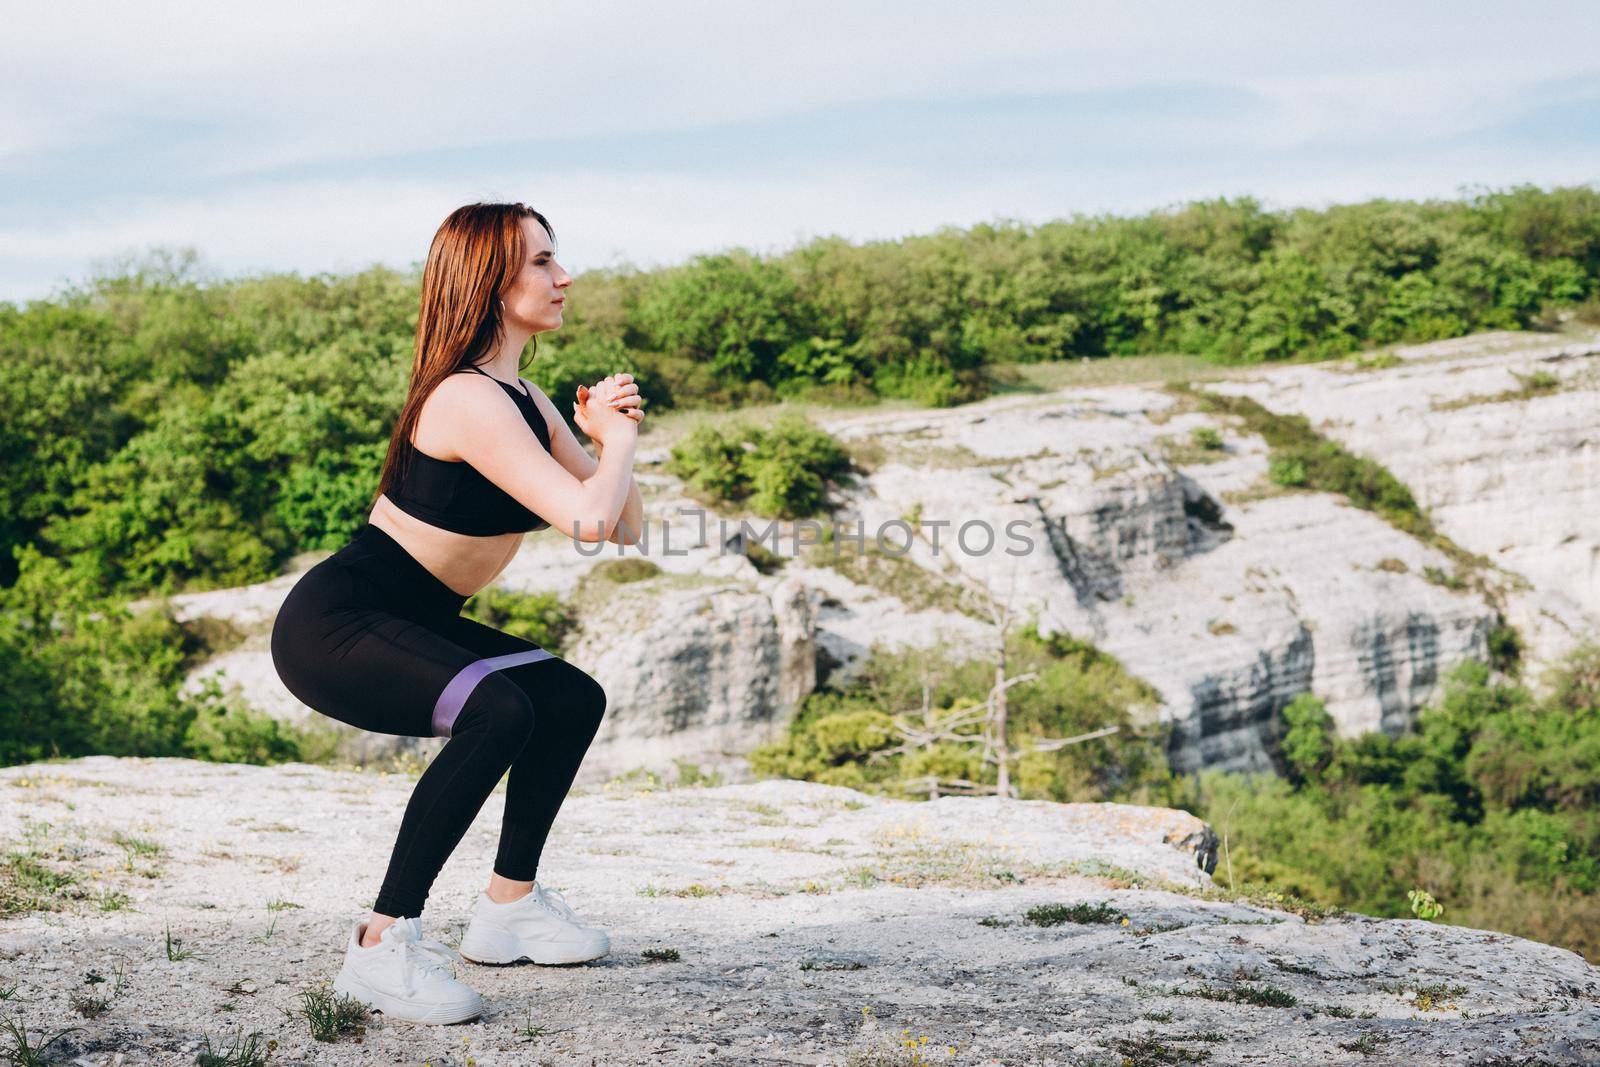 The girl is engaged in sports in nature. Purple rubber band for stretching and swaping muscles of hands and feet. A beautiful athlete in the mountains.